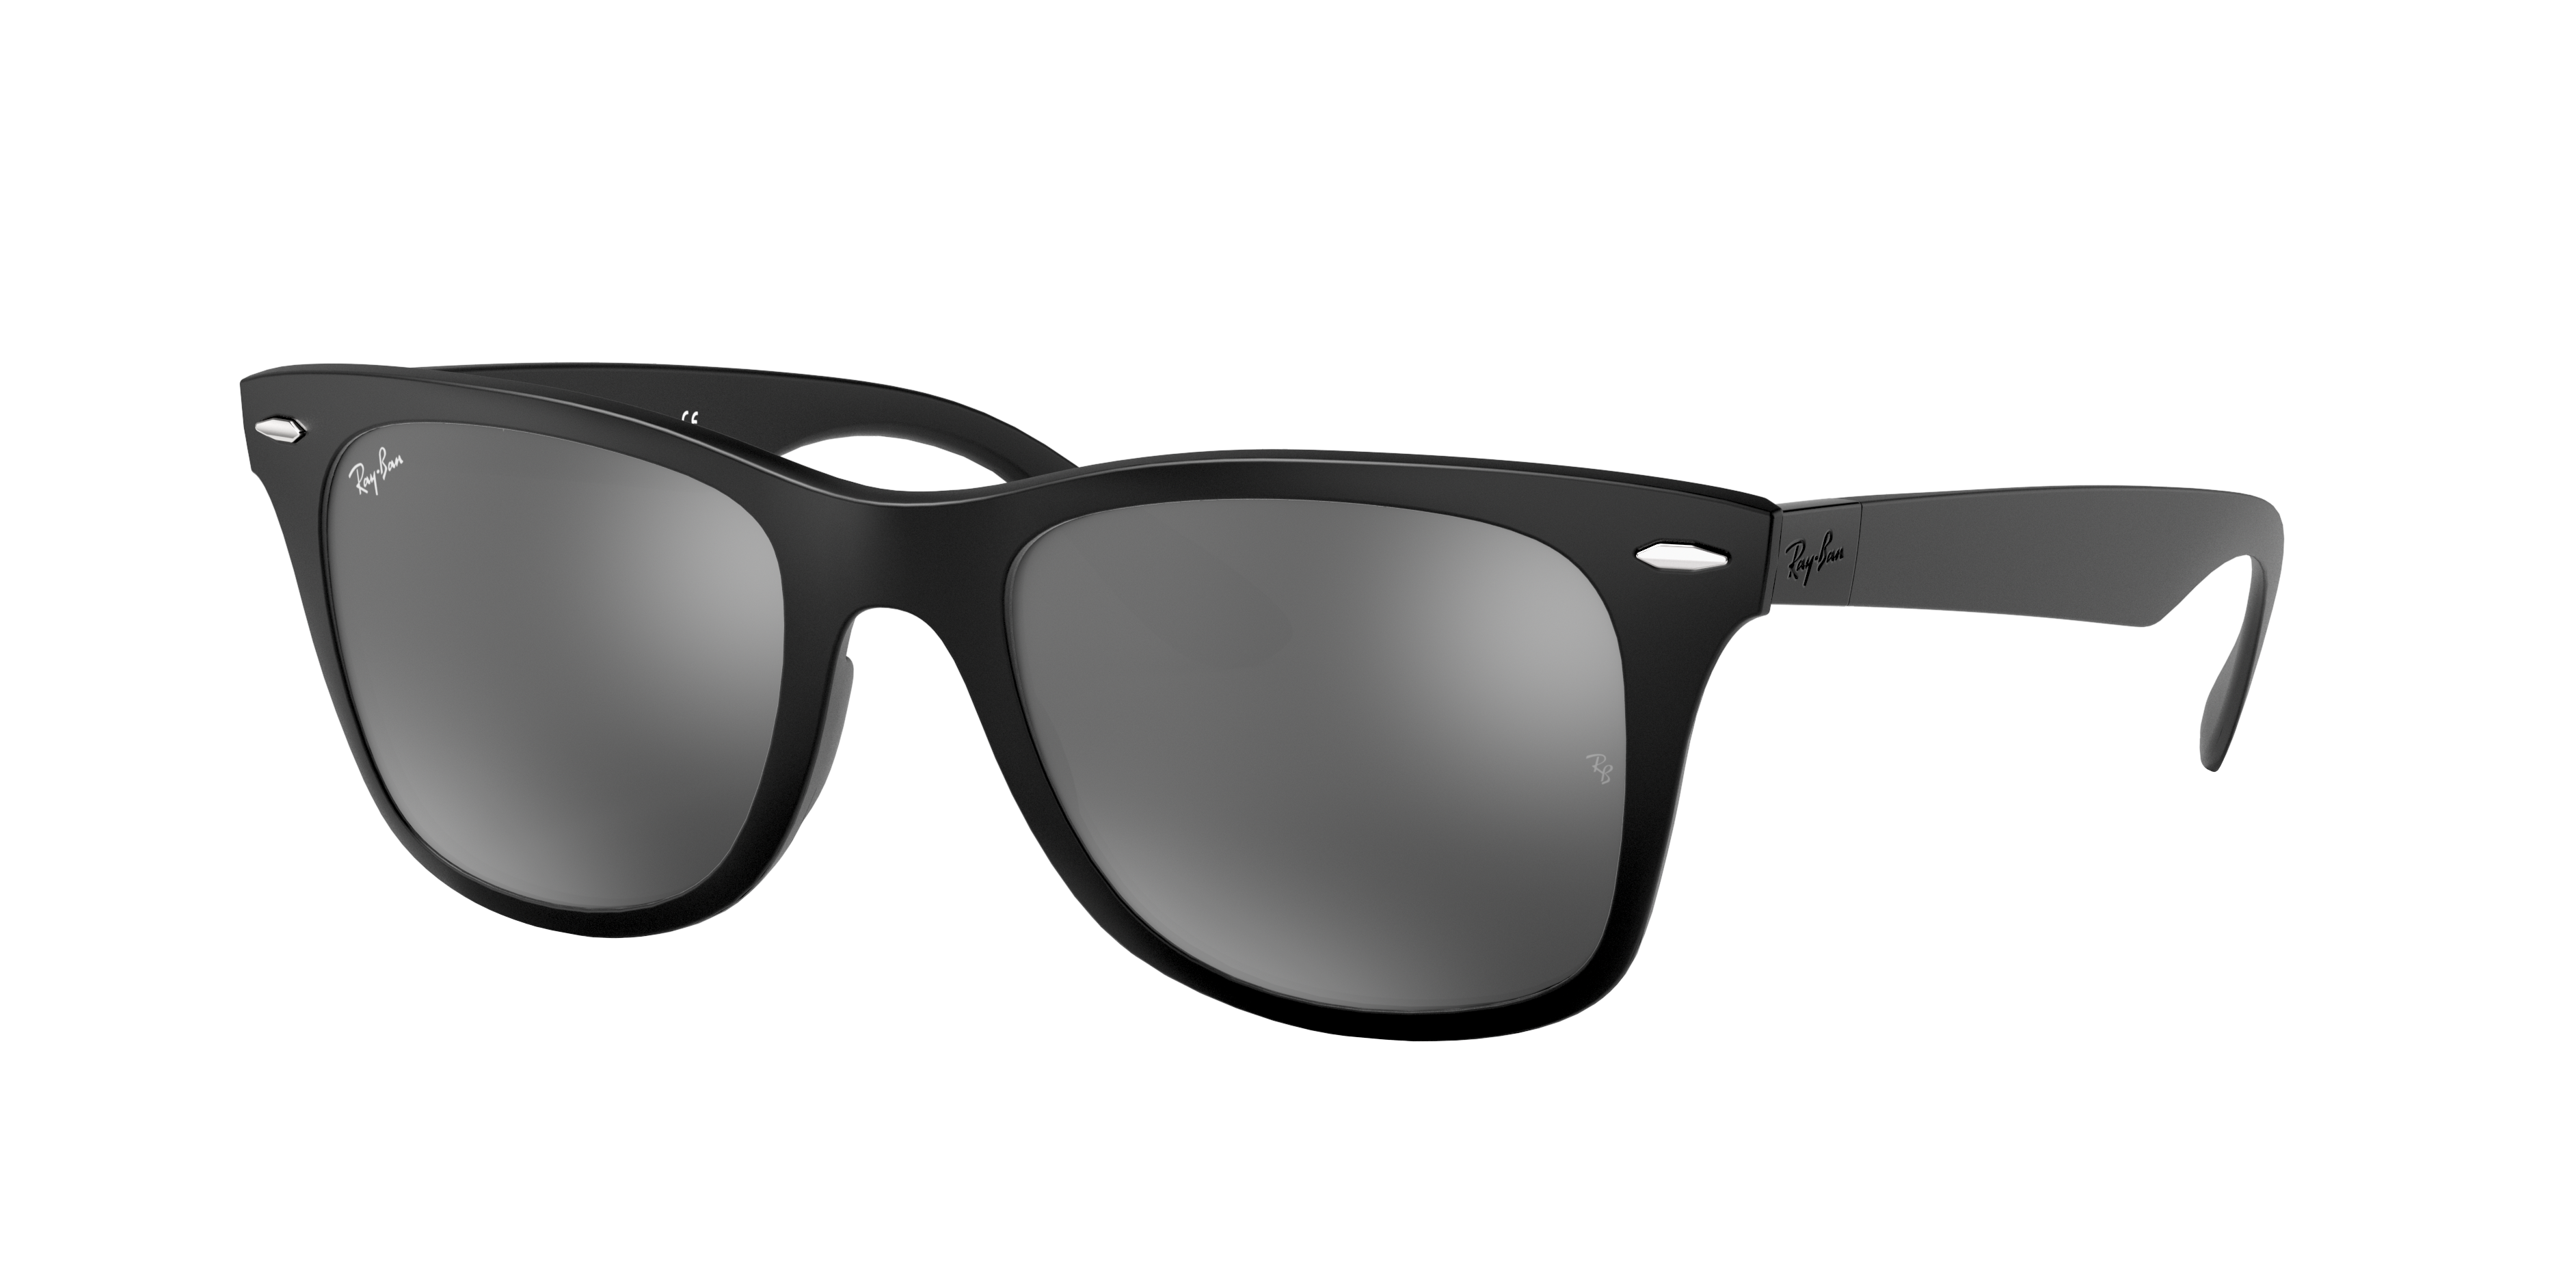 ray ban liteforce rb 4297